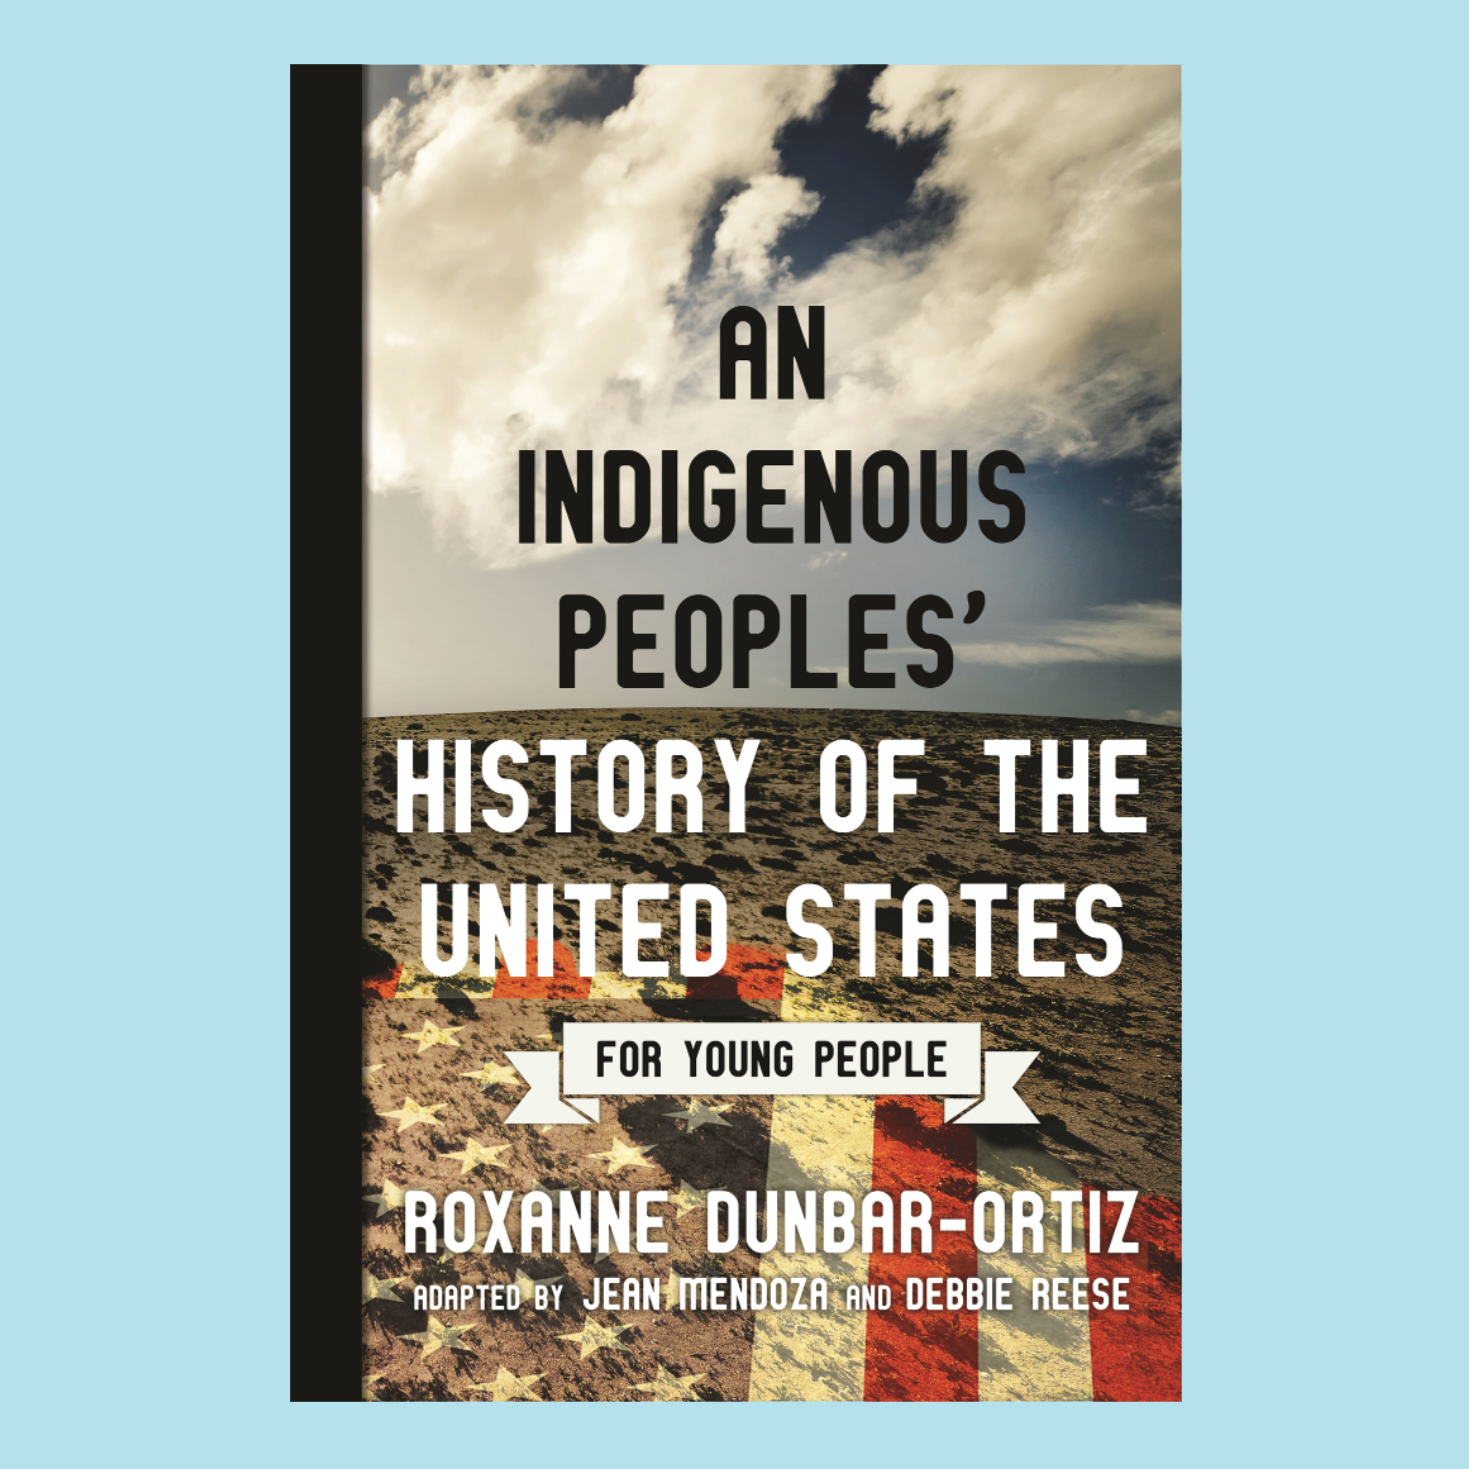 The cover of "An Indigenous Peoples' History of the United States."